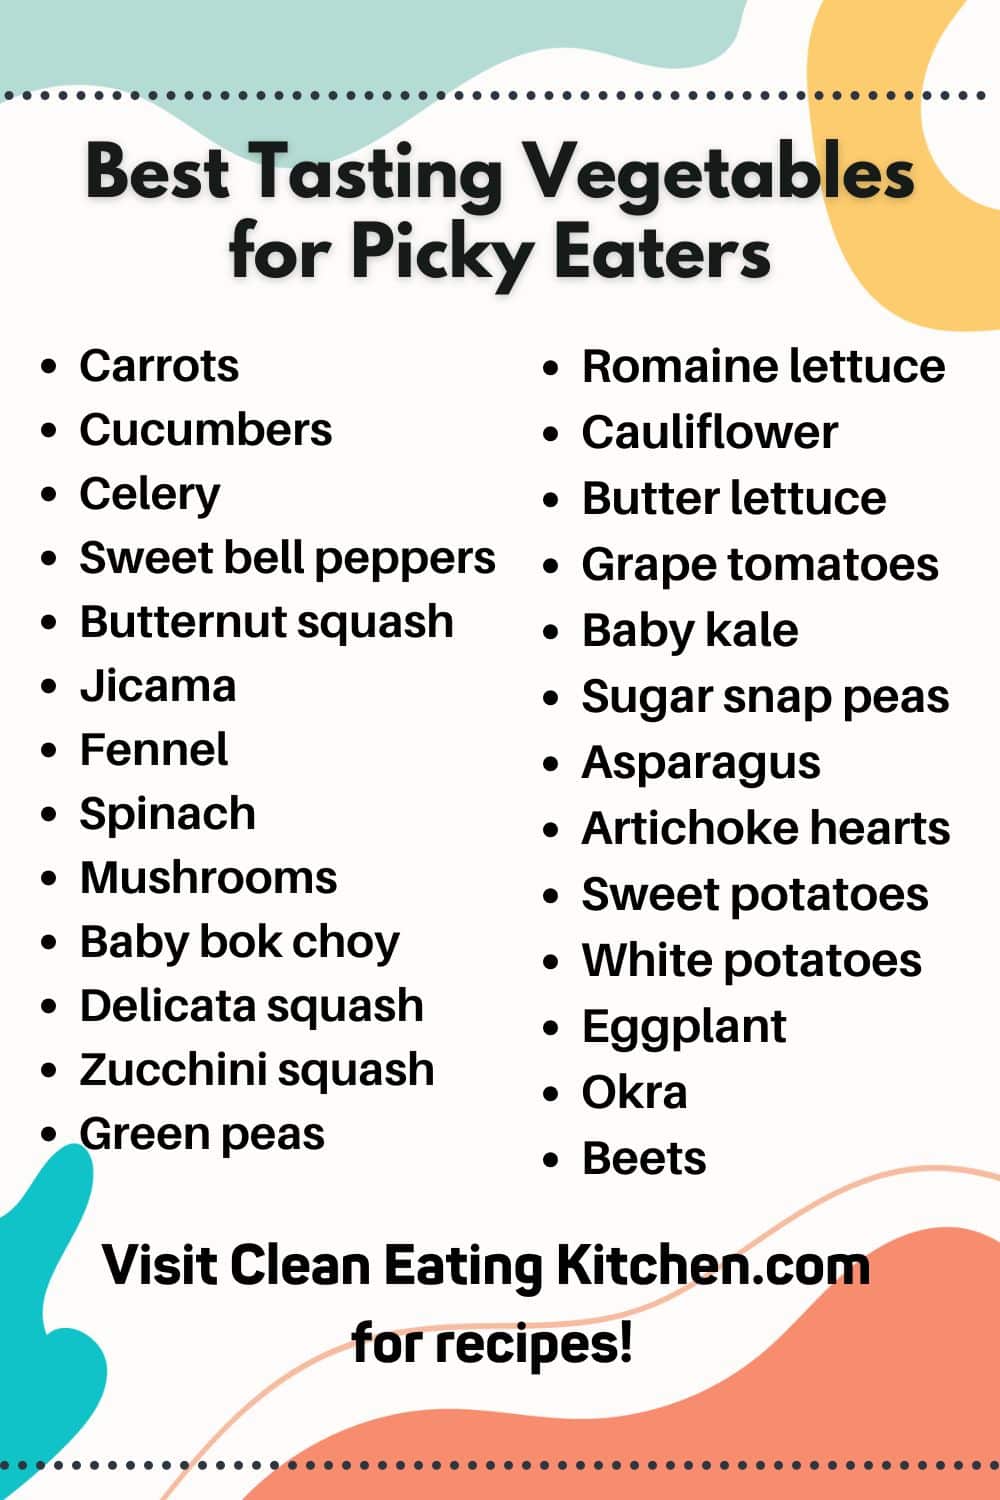 Best Tasting Vegetables for Kids and Picky Eaters infographic.